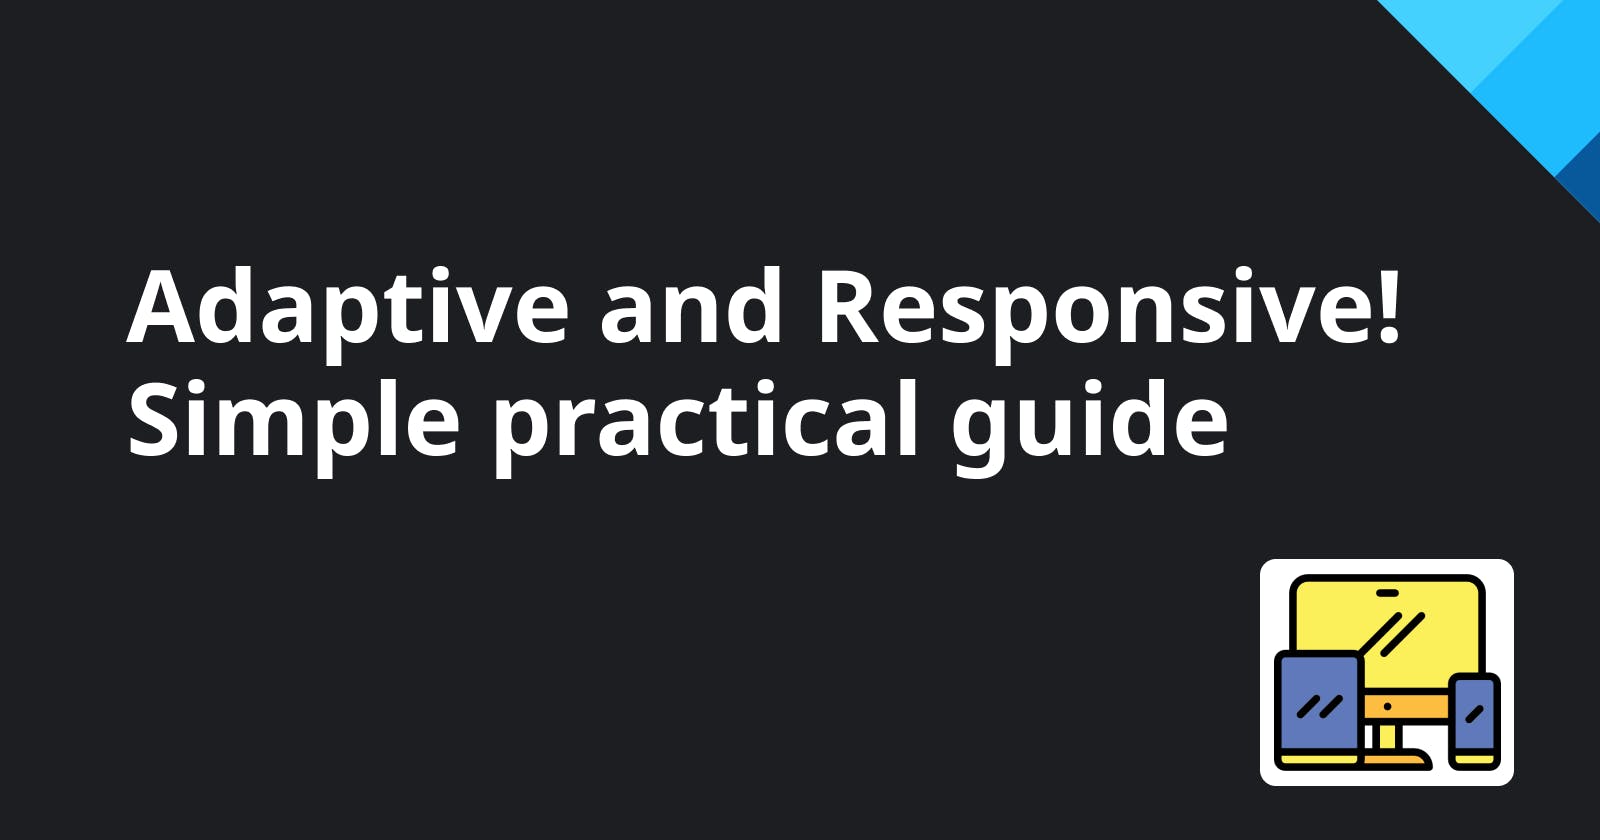 Adaptive and Responsive! Simple practical guide